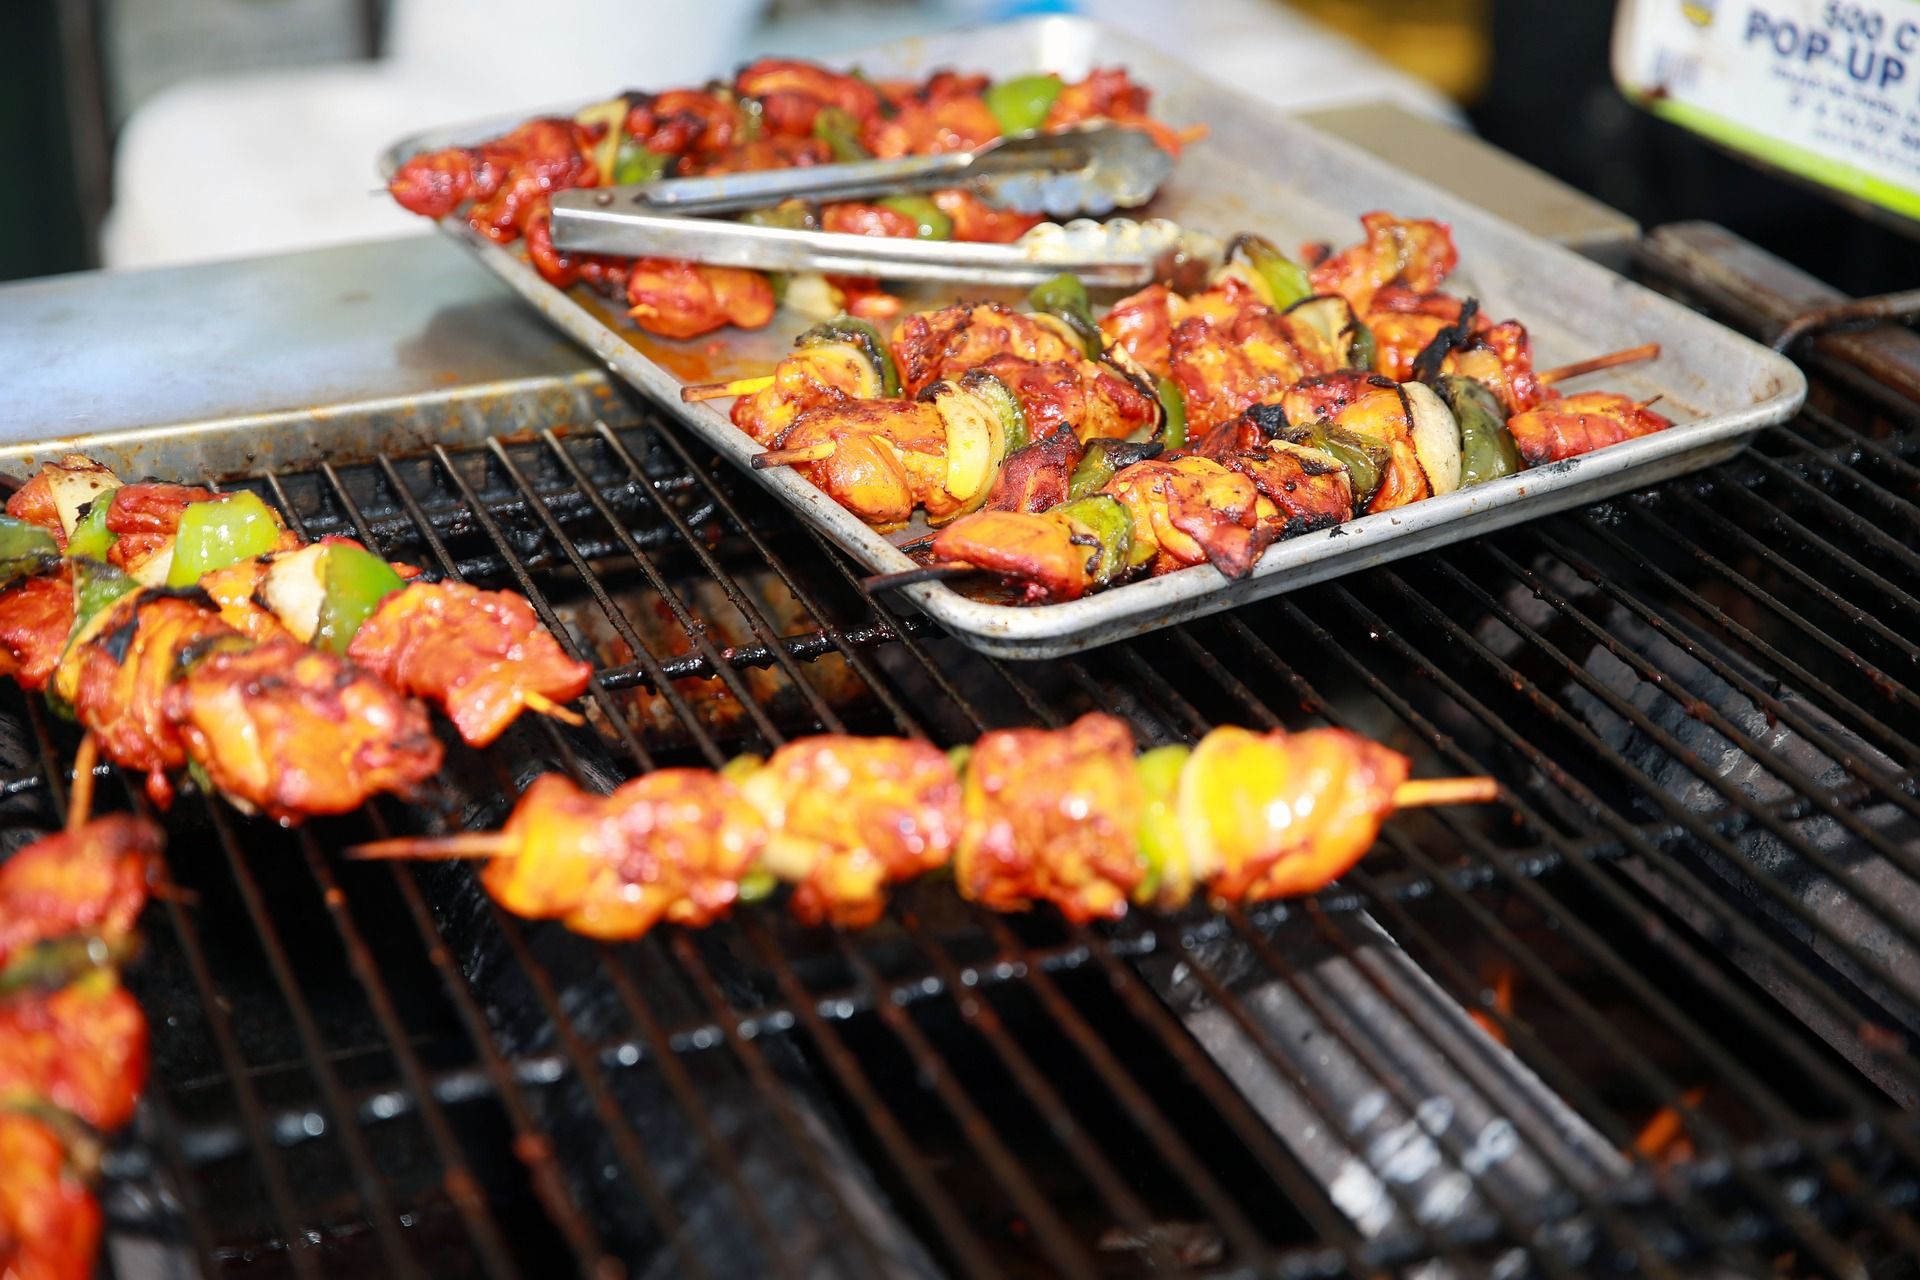 Skewers on a grill representing delicious Caribbean cuisine